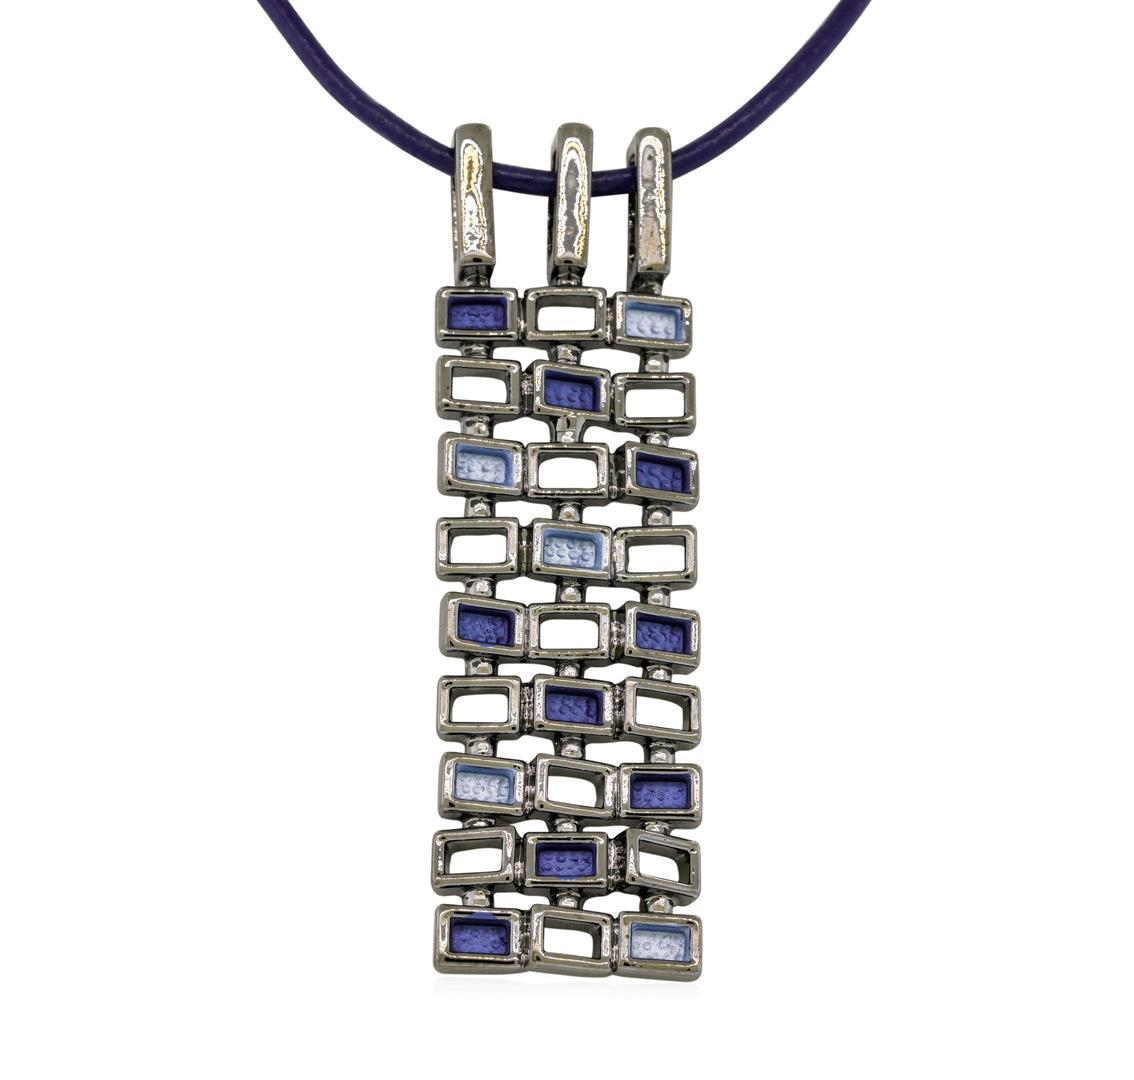 Crystal Rectangle Pendant Necklace - Rhodium Plated